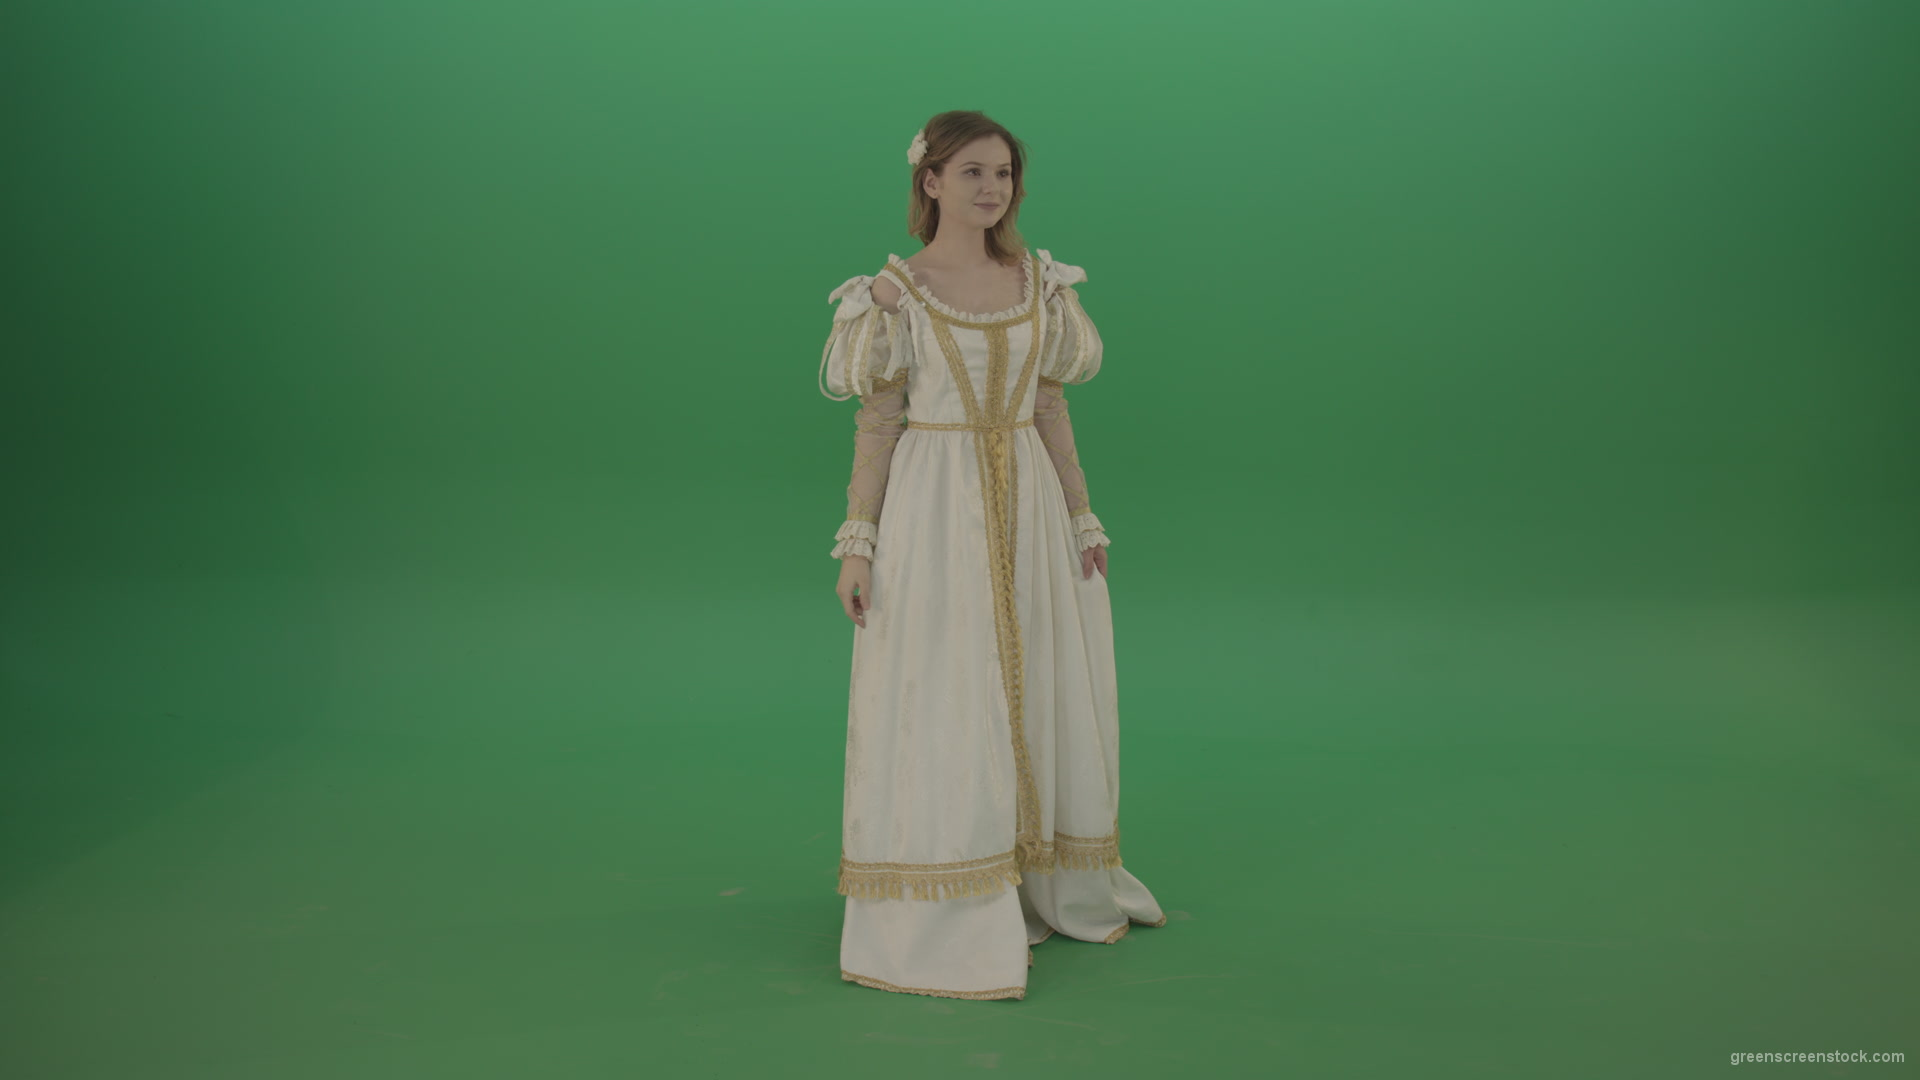 Flips-touchscreen-in-a-white-suit-of-a-medieval-woman-isolated-on-green-screen_009 Green Screen Stock